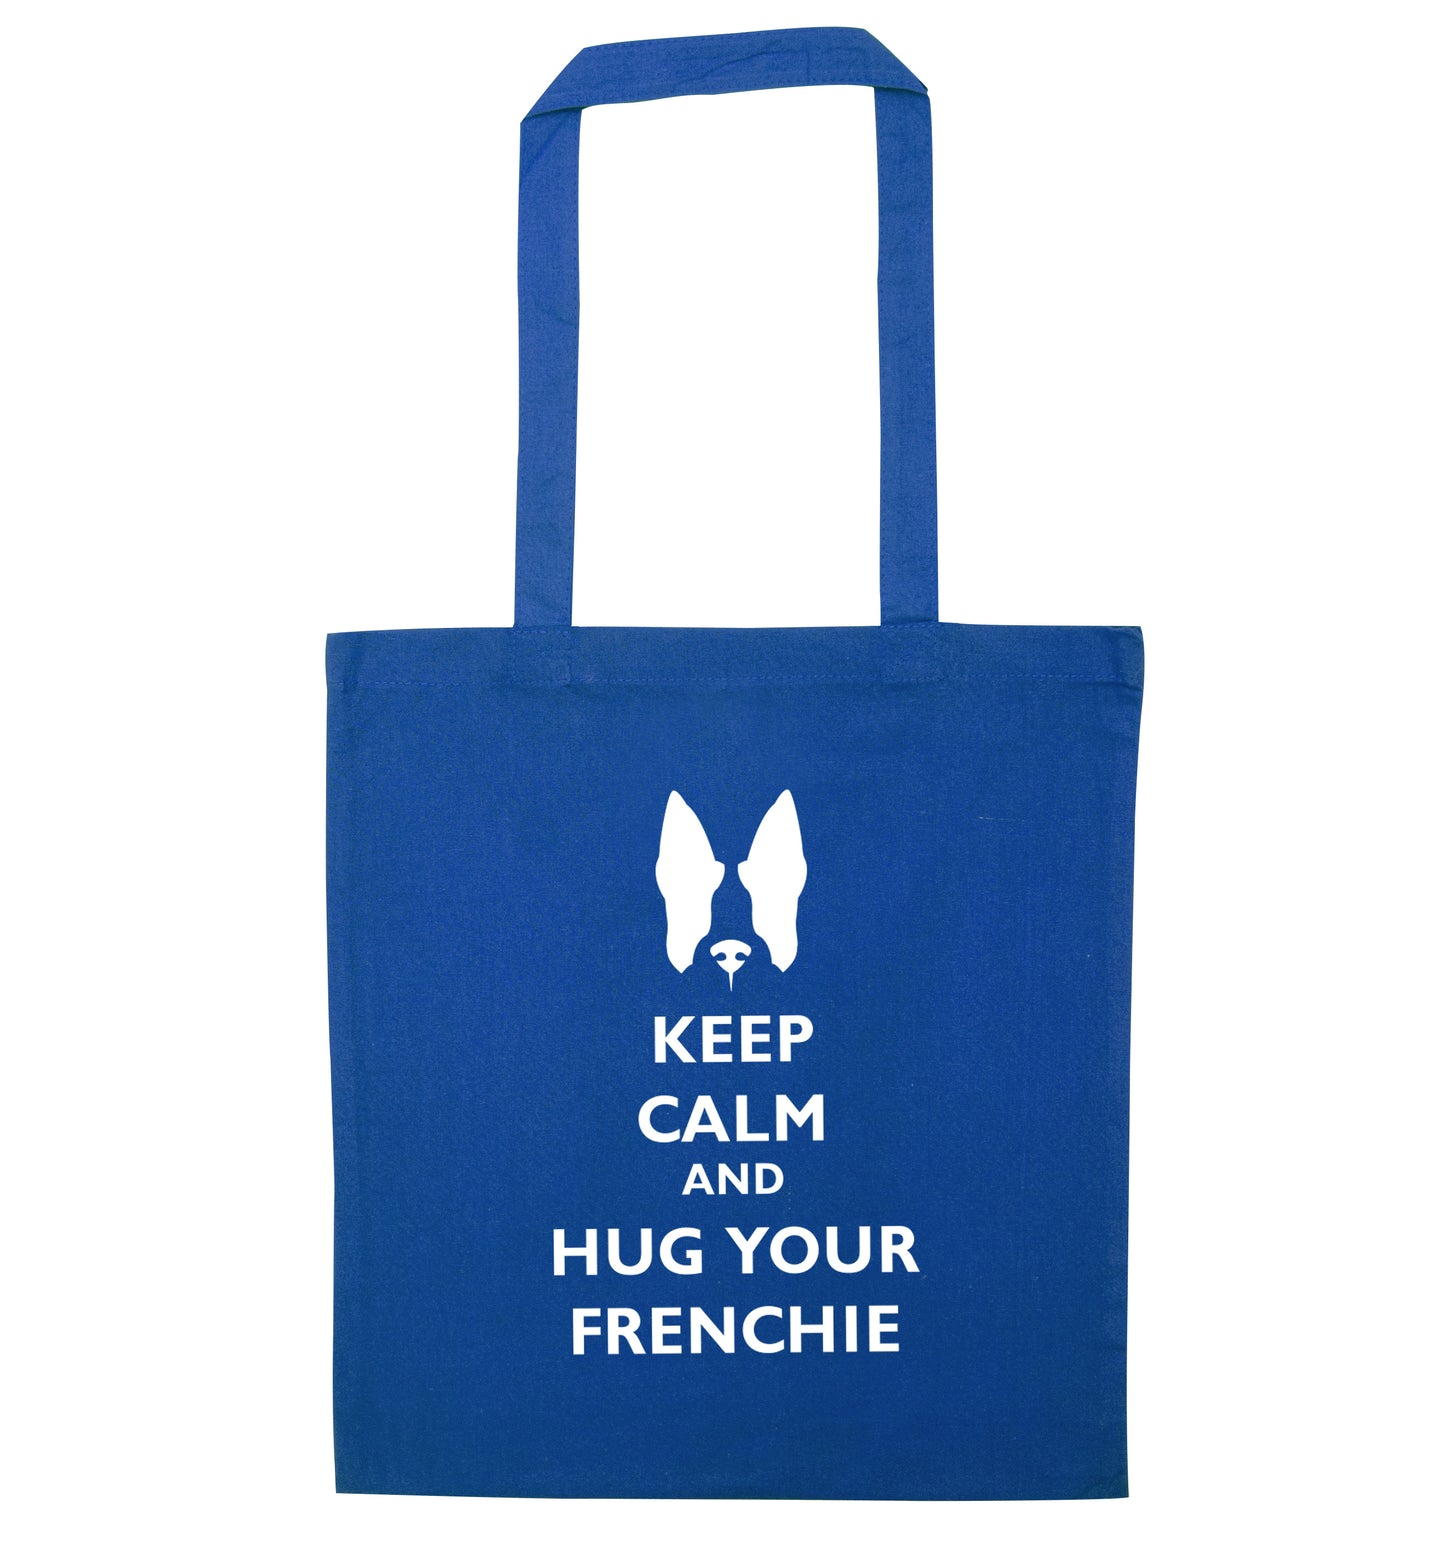 Keep calm and hug your frenchie blue tote bag